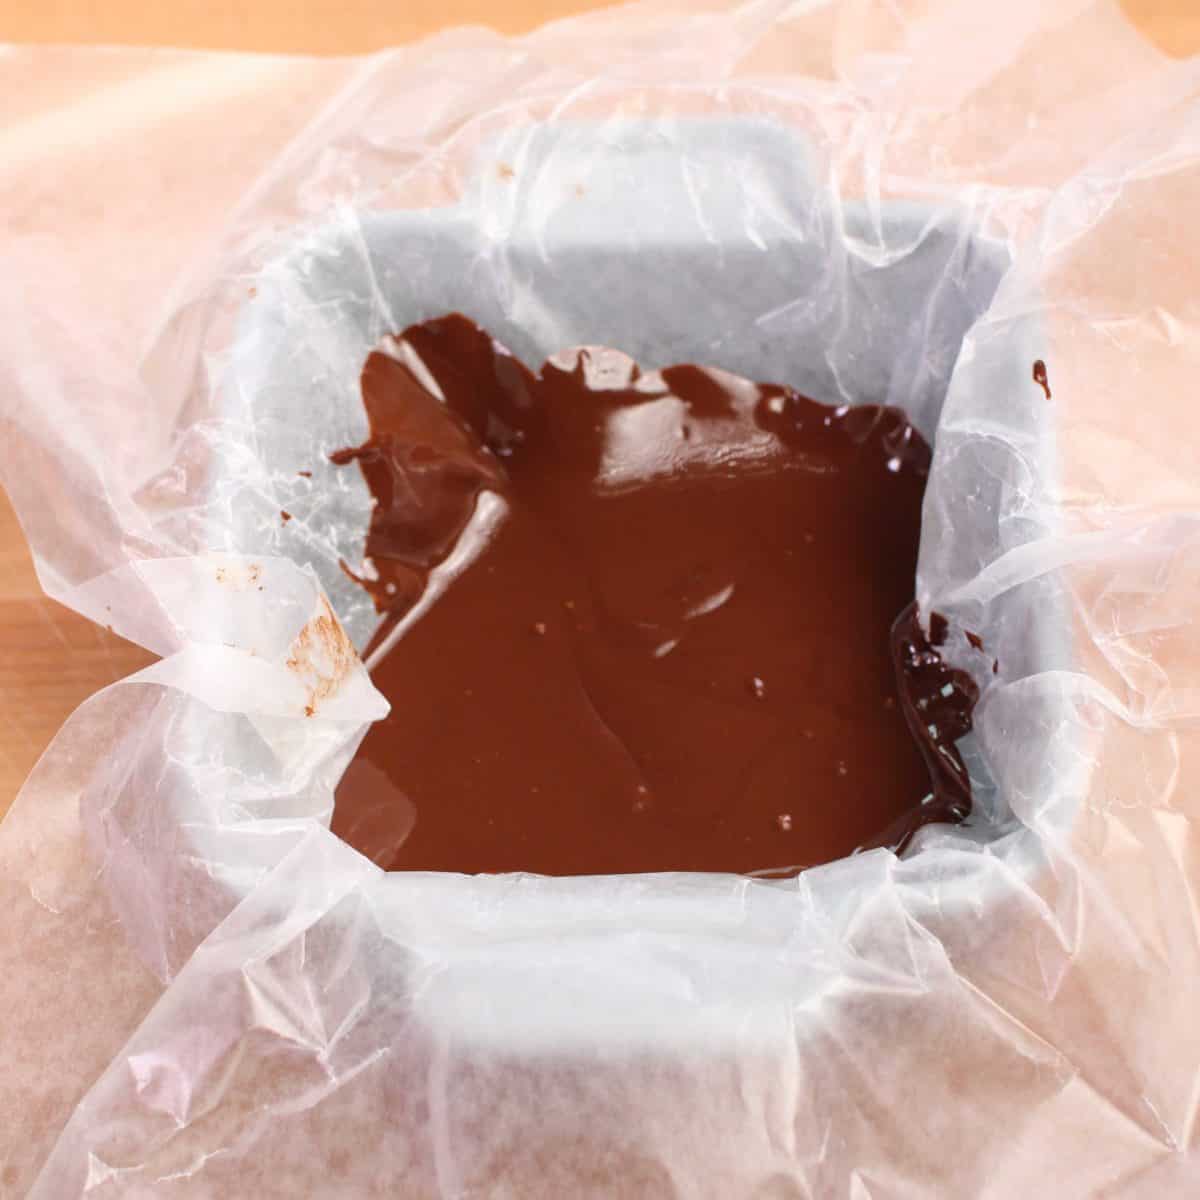 melted chocolate in a wax paper lined baking dish.